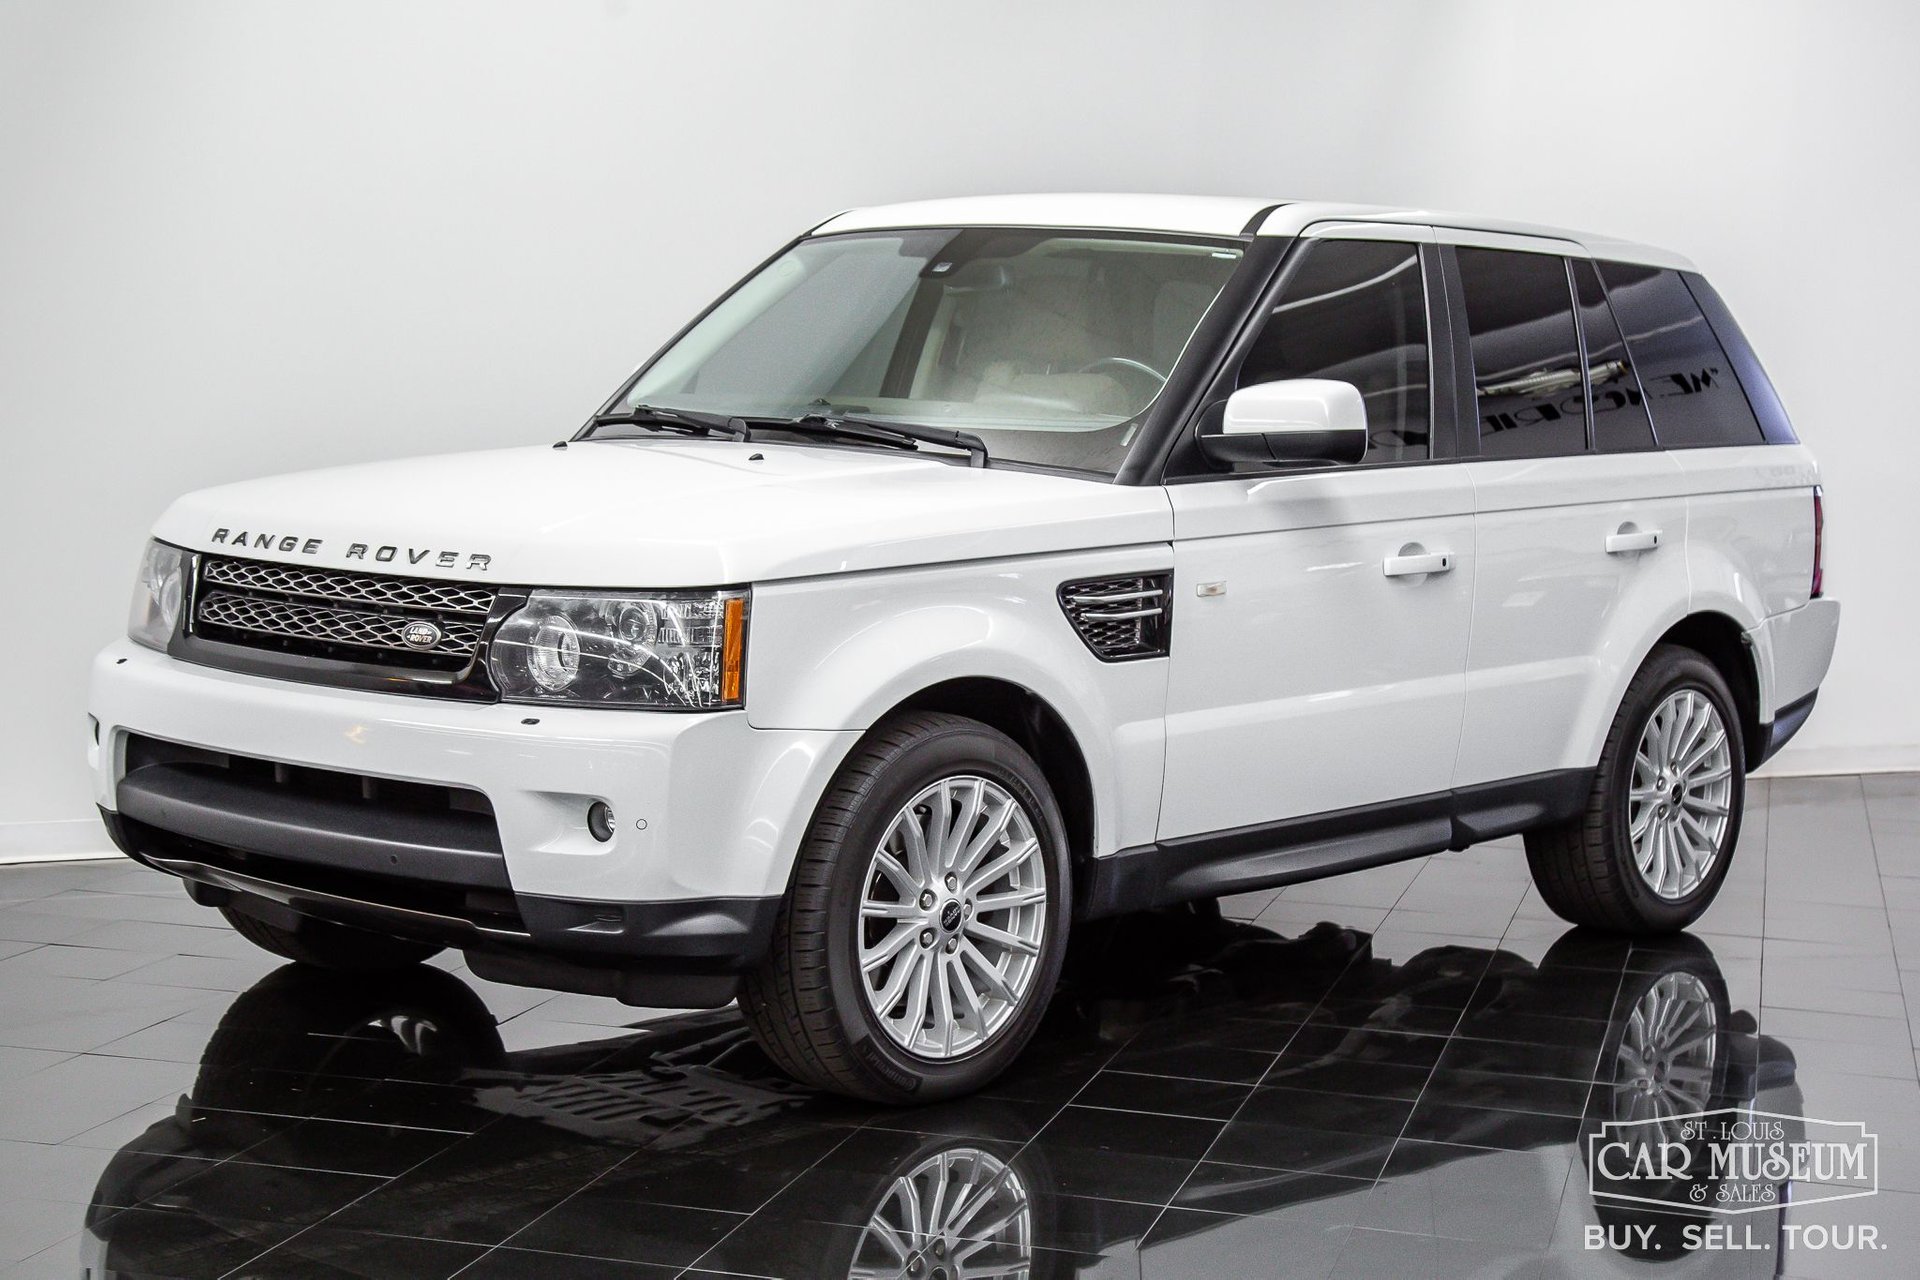 2013 Land Rover Range Rover For Sale | St. Louis Car Museum